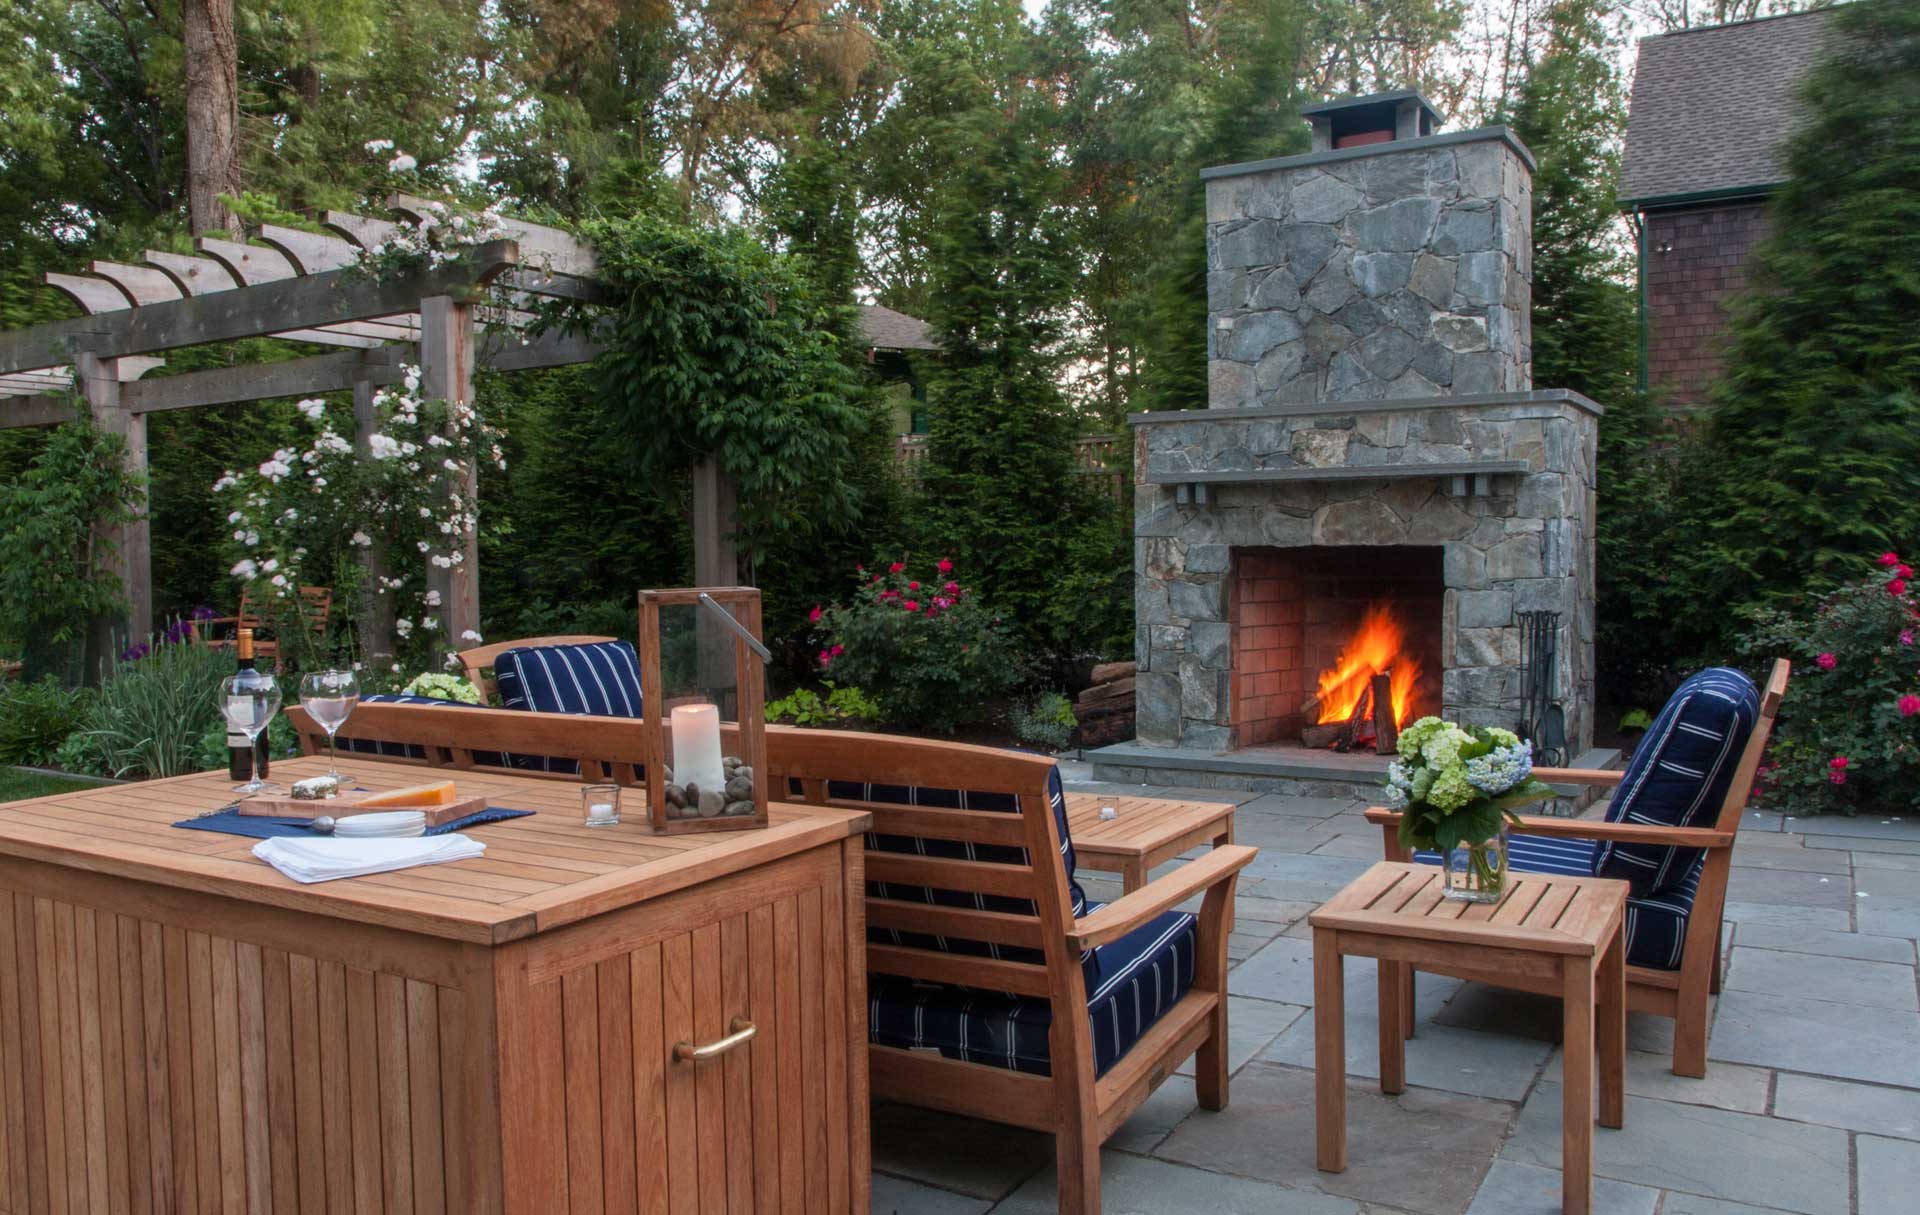 An inviting patio featuring a fire pit and comfortable outdoor furniture, creating a serene garden retreat.